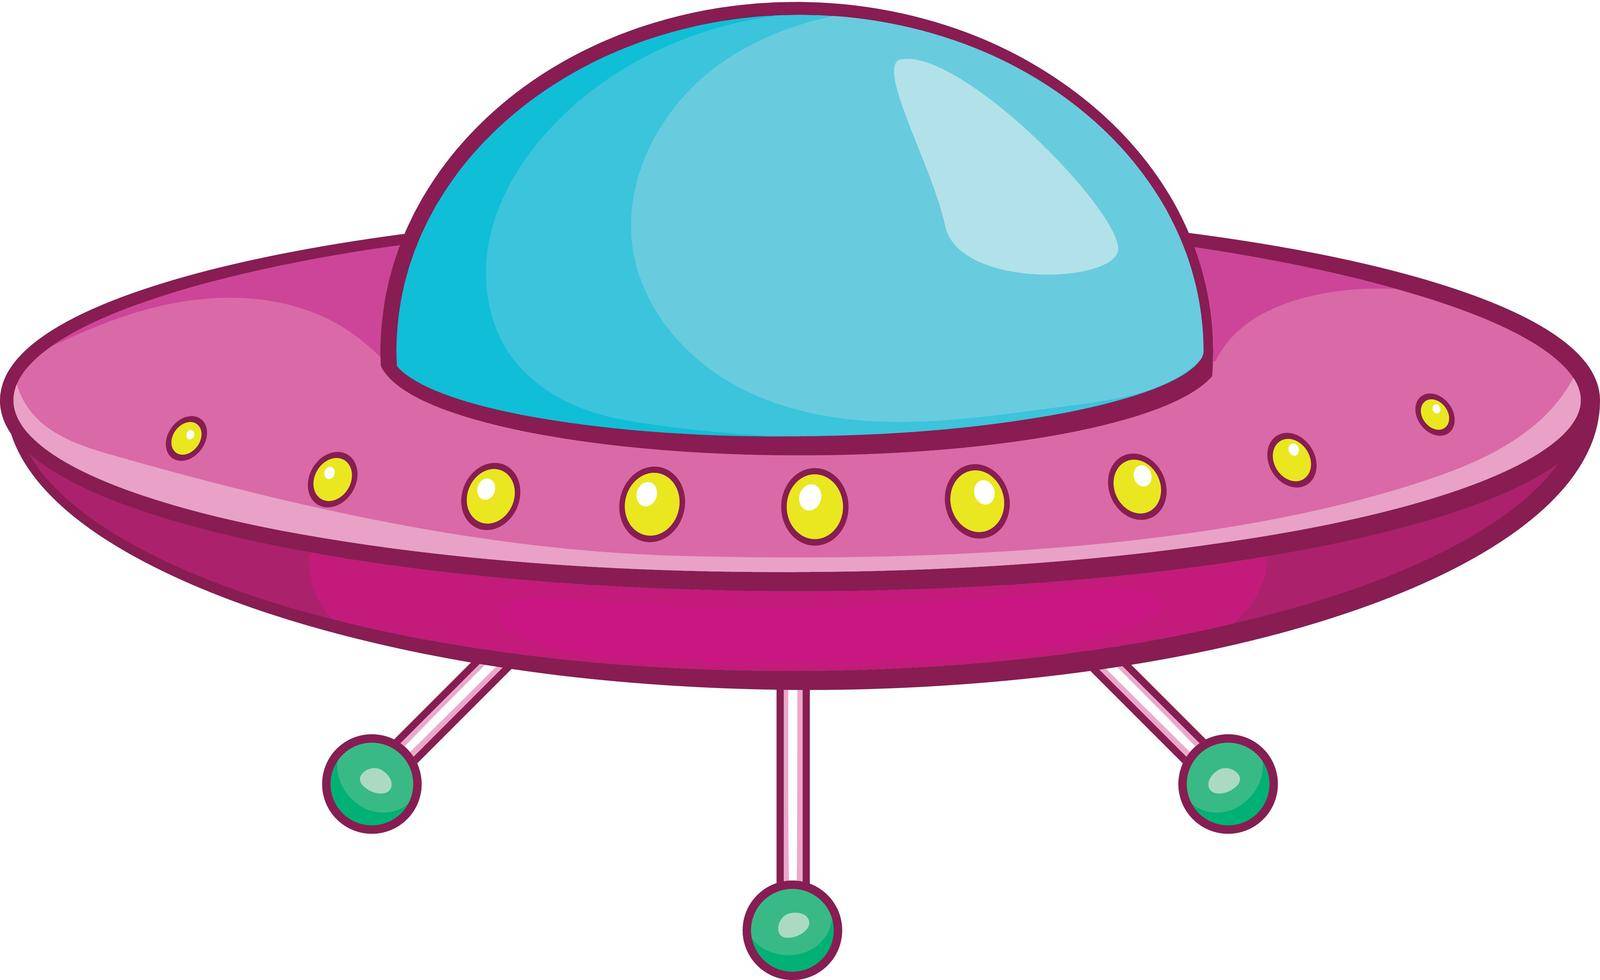 UFO icon in cartoon style isolated on white background. Unidentified flying object symbol